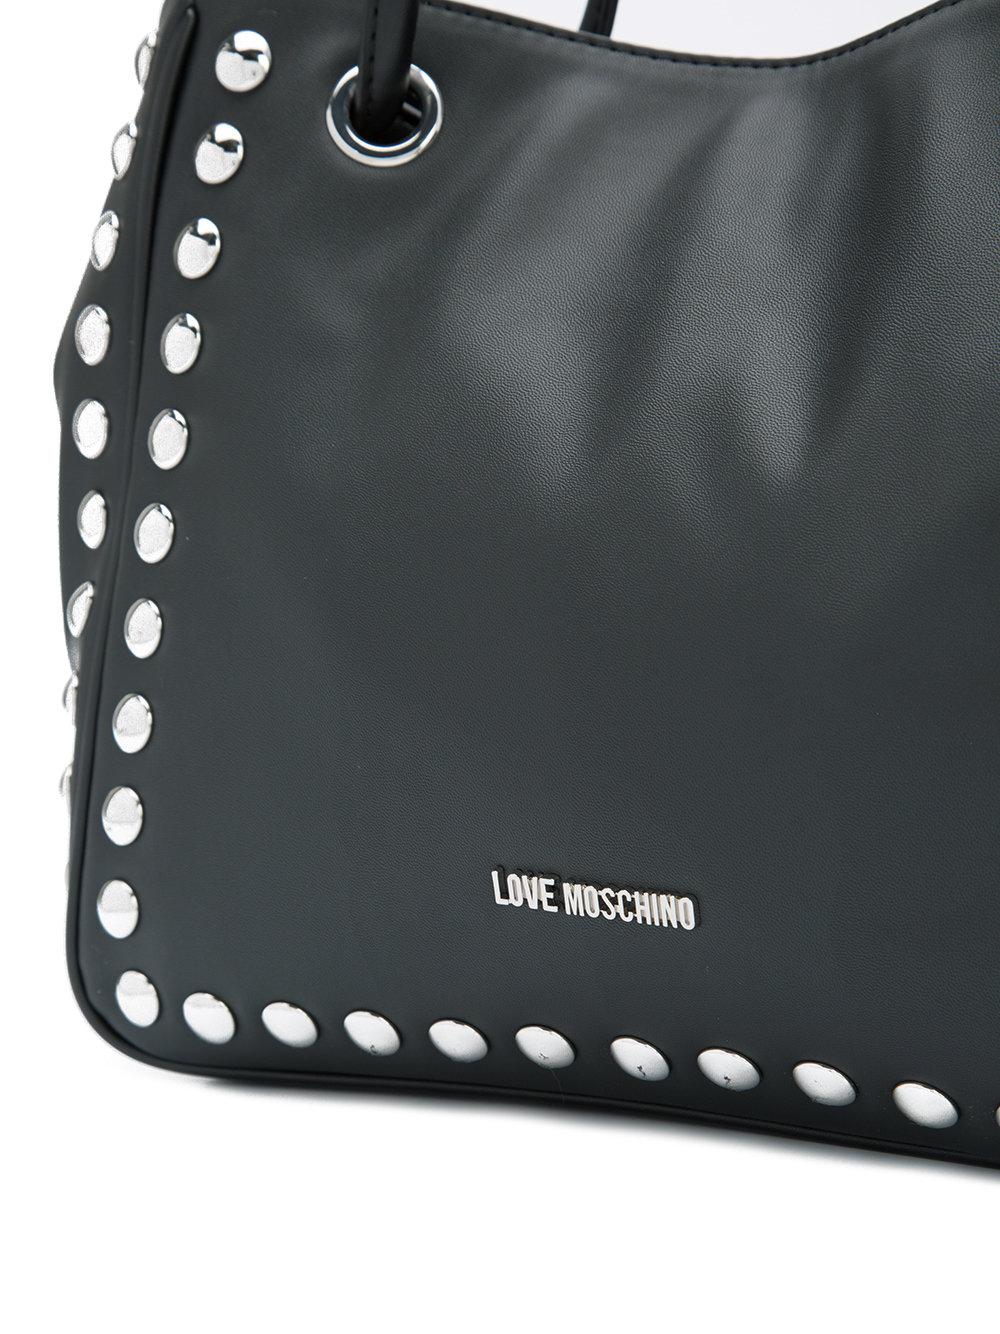 Love Moschino Silver Studded Tote Bag in Black | Lyst